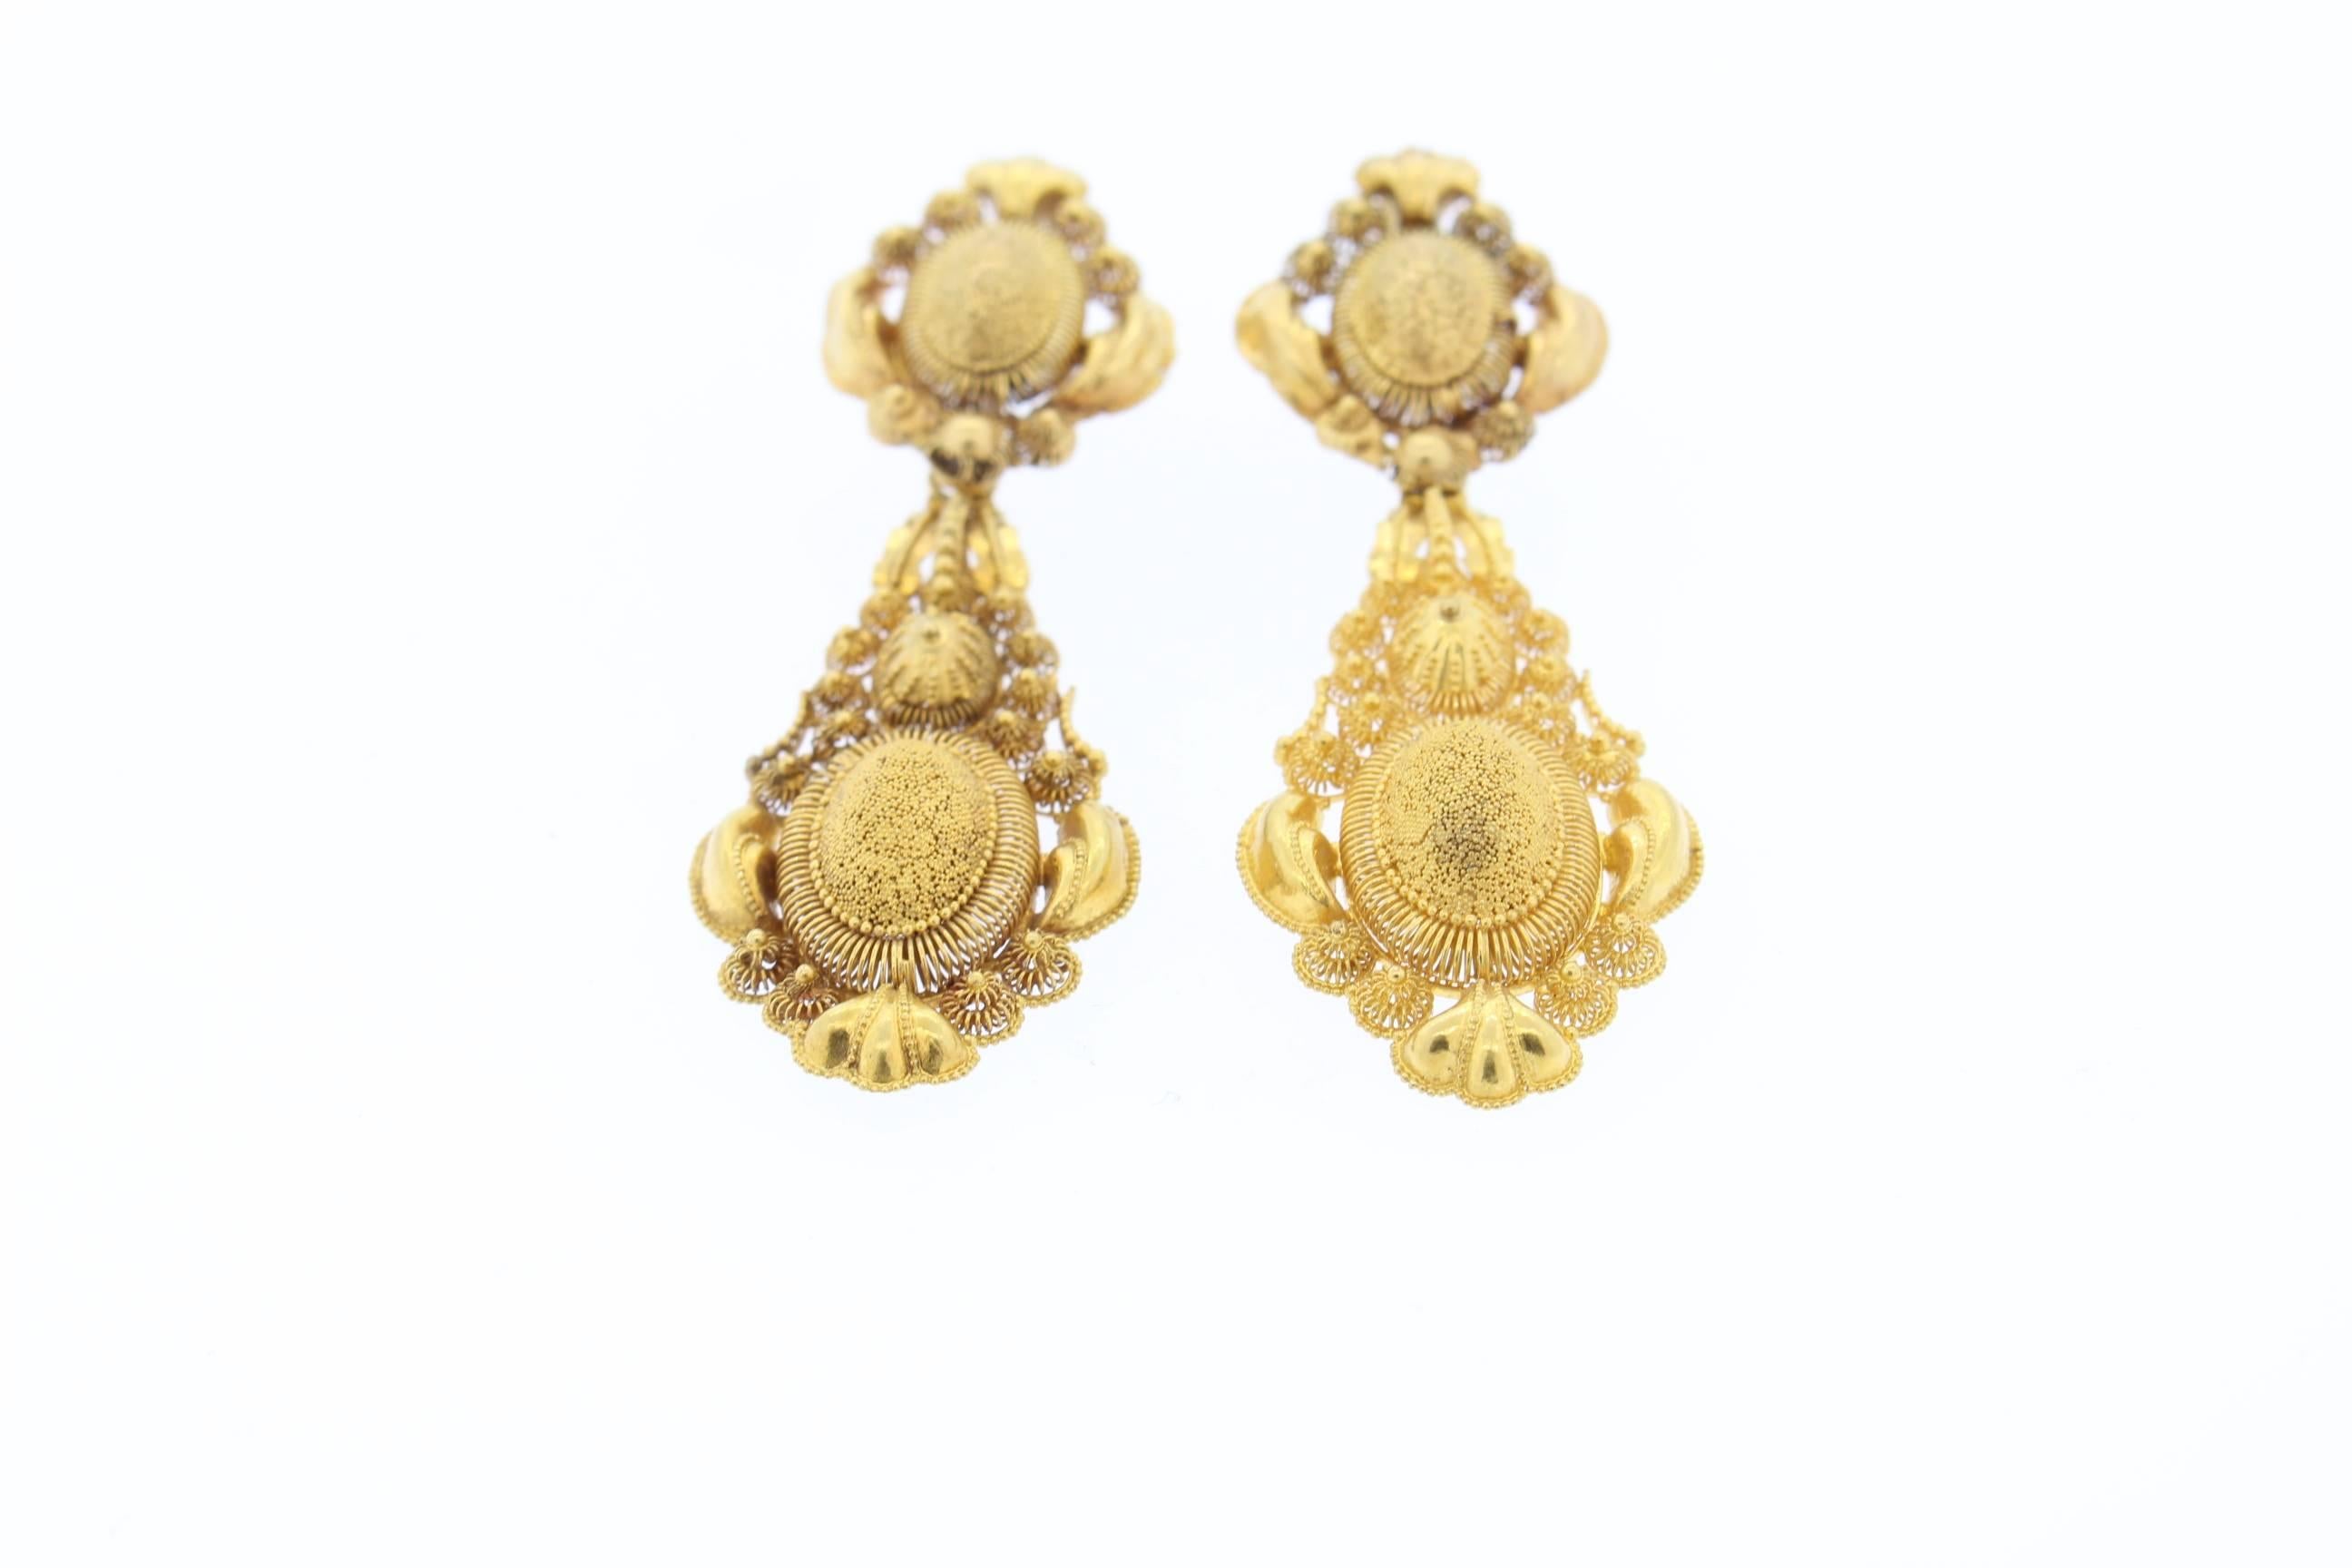 These antique earrings are light and delicate yet have presence and size when worn.  The earrings are made of 18k gold and have exquisite cannetille work from about 1820.  Cannetille work was a favored style in the 1820s and 1830s where wirework and